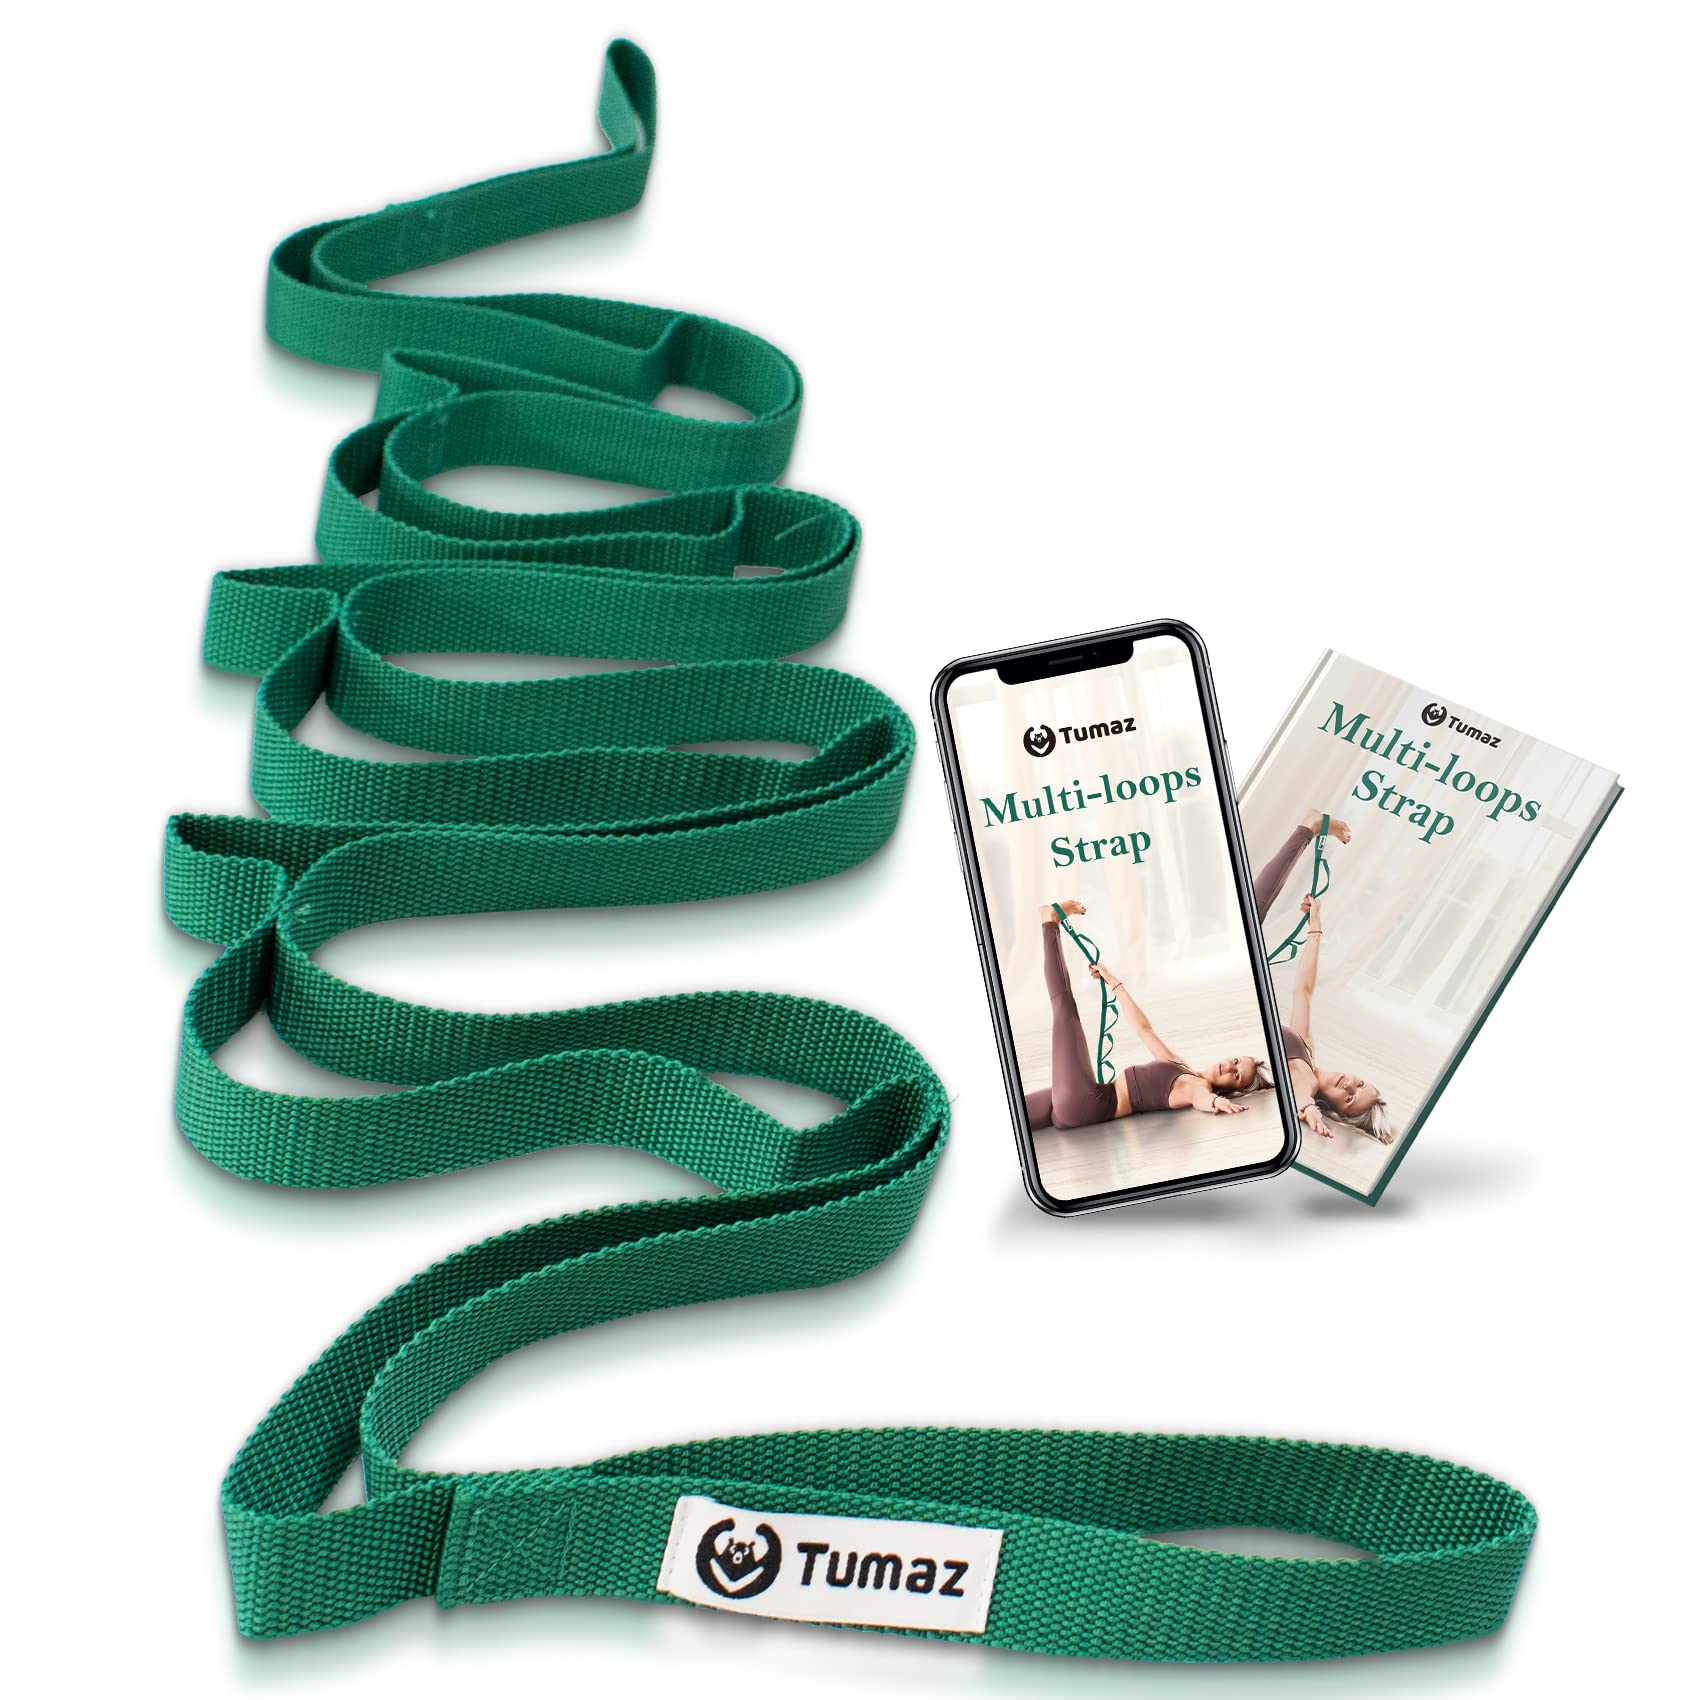 Tumaz Stretching Strap - 10 Loops & Non-Elastic Yoga Strap Budget Version-  The Perfect Home Workout Stretch Strap for Physical Therapy, Yoga, Pilates,  Flexibility - Included E-Book, Extra Durable 08. Green